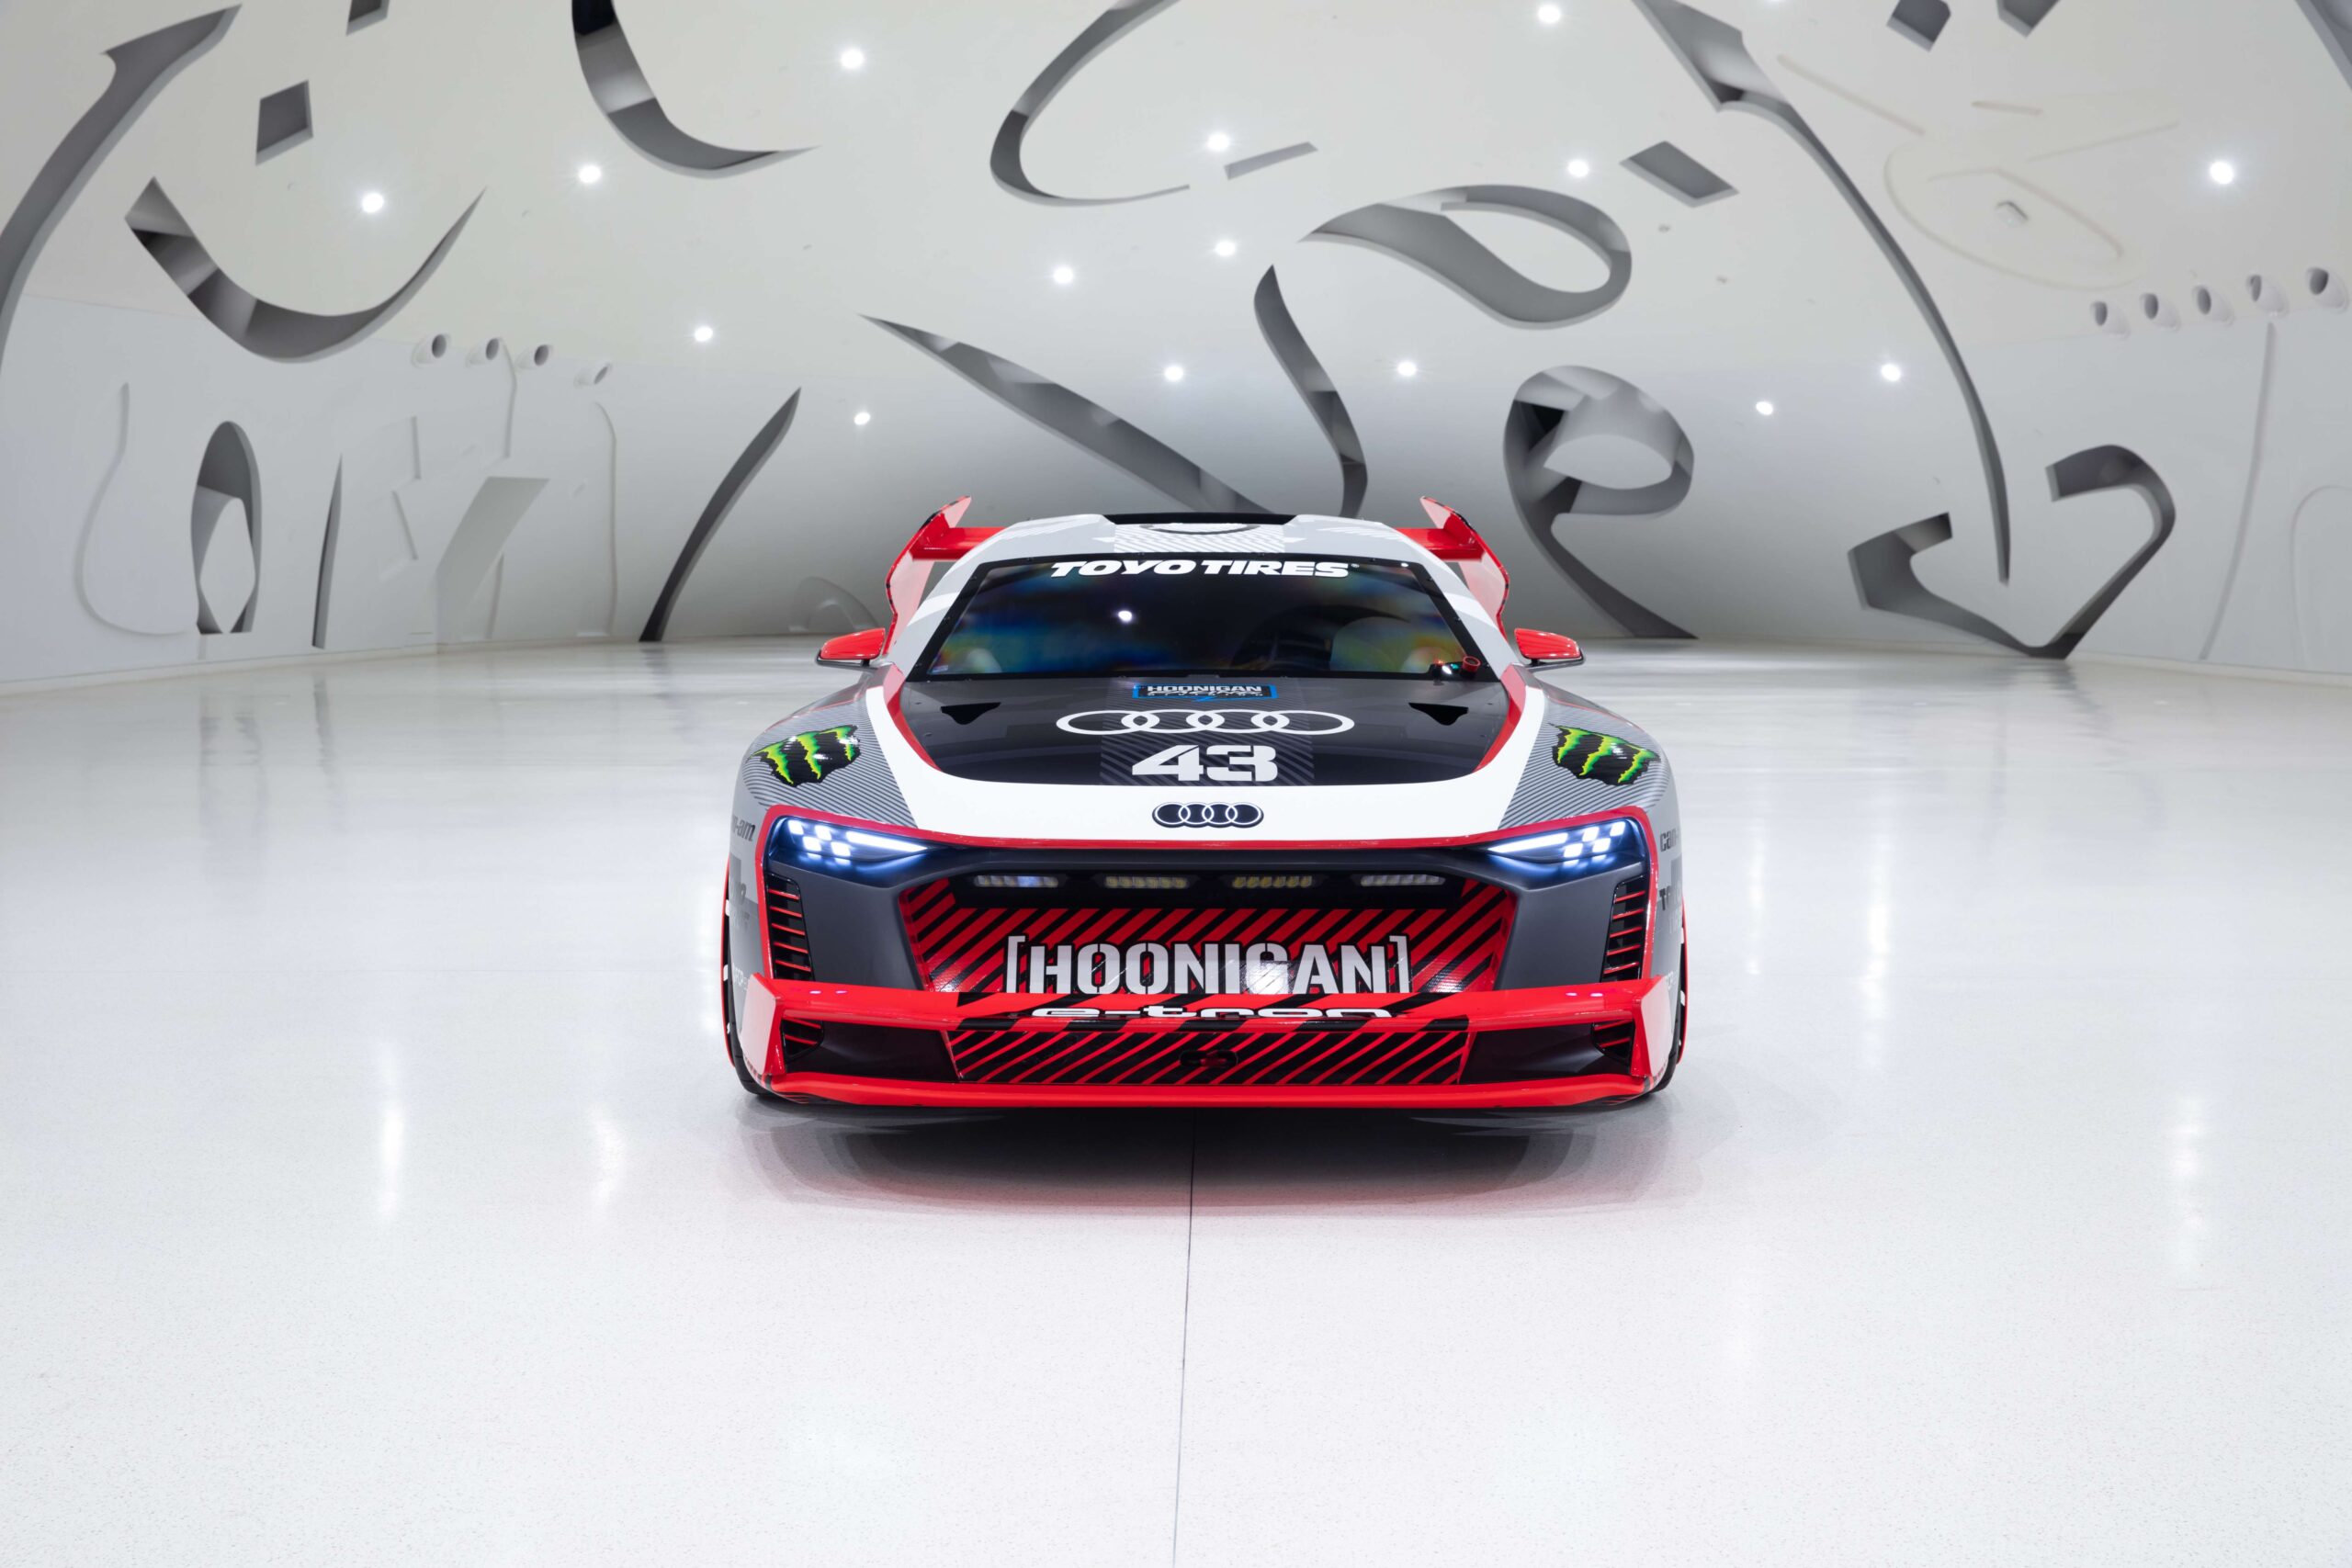 Museum of the Future hosts Audi’s iconic S1 e-tron quattro Hoonitron – a race car like no other